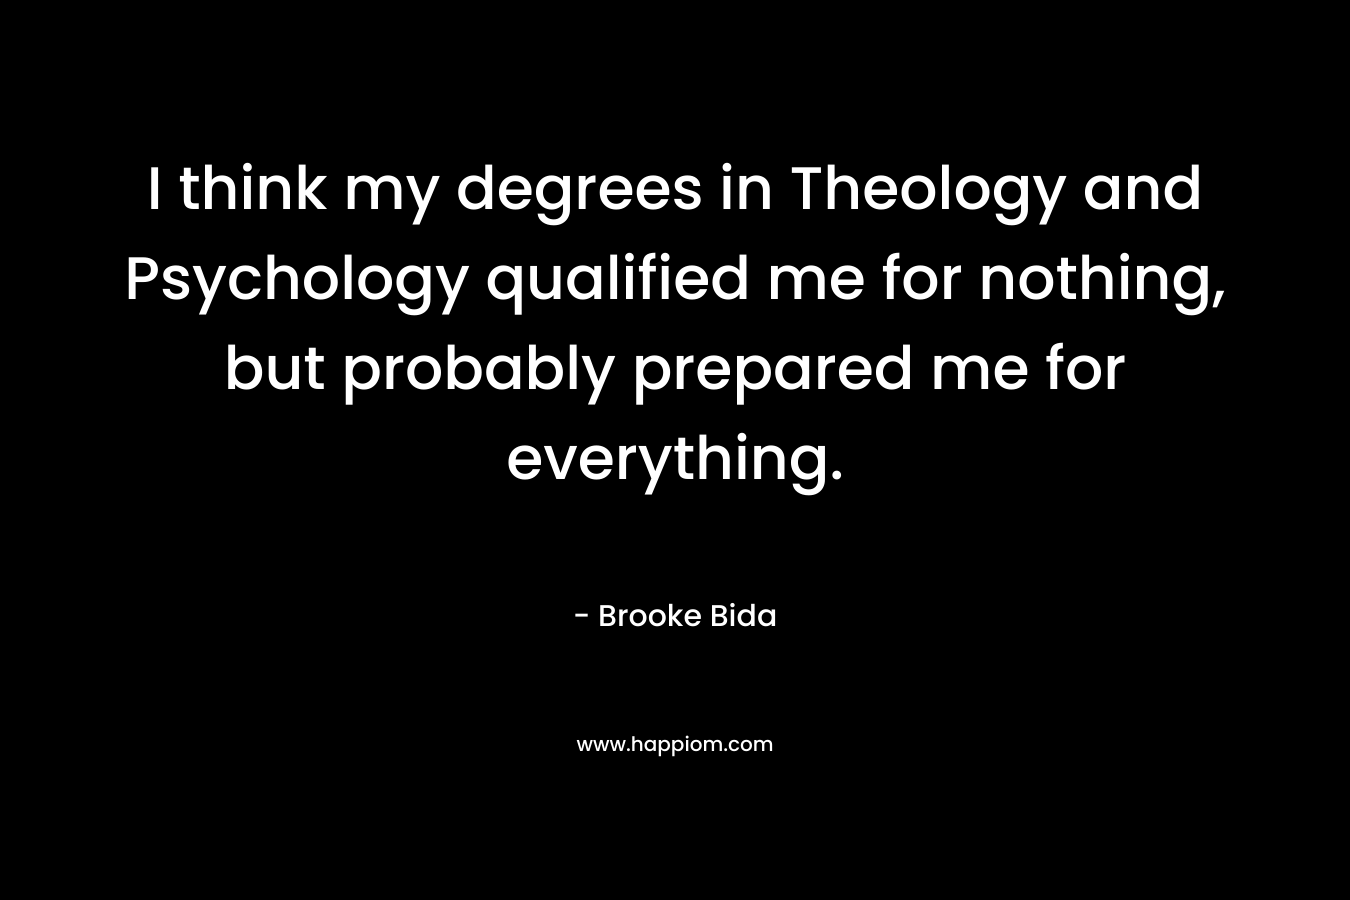 I think my degrees in Theology and Psychology qualified me for nothing, but probably prepared me for everything.